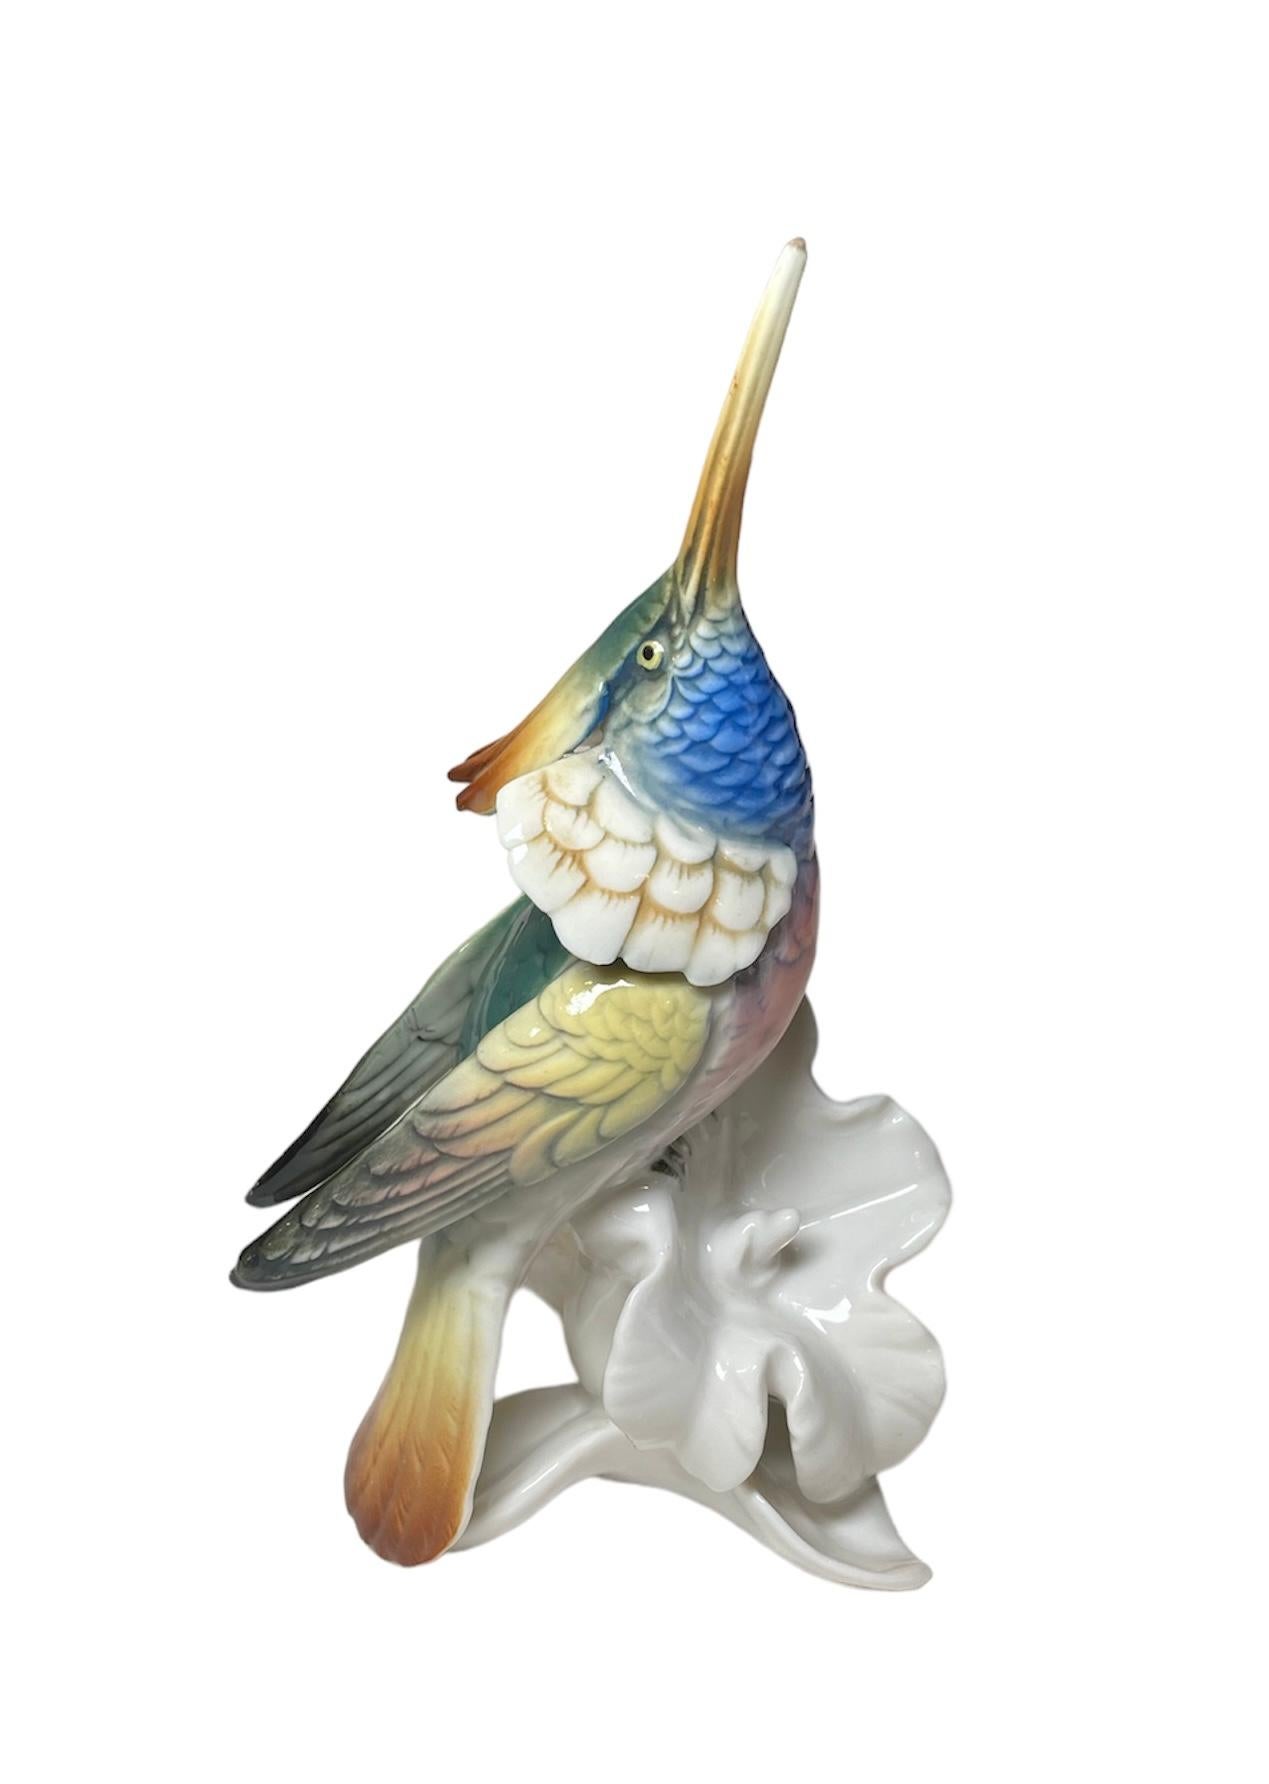 This is a Karl Ens Porcelain Factory bird figurine. It depicts a colorful hummingbird standing over an Hibiscus flower like and looking up to the sky. He is very proud to show his long beak. Below the base, it is the Karl Ens Porcelain Factory